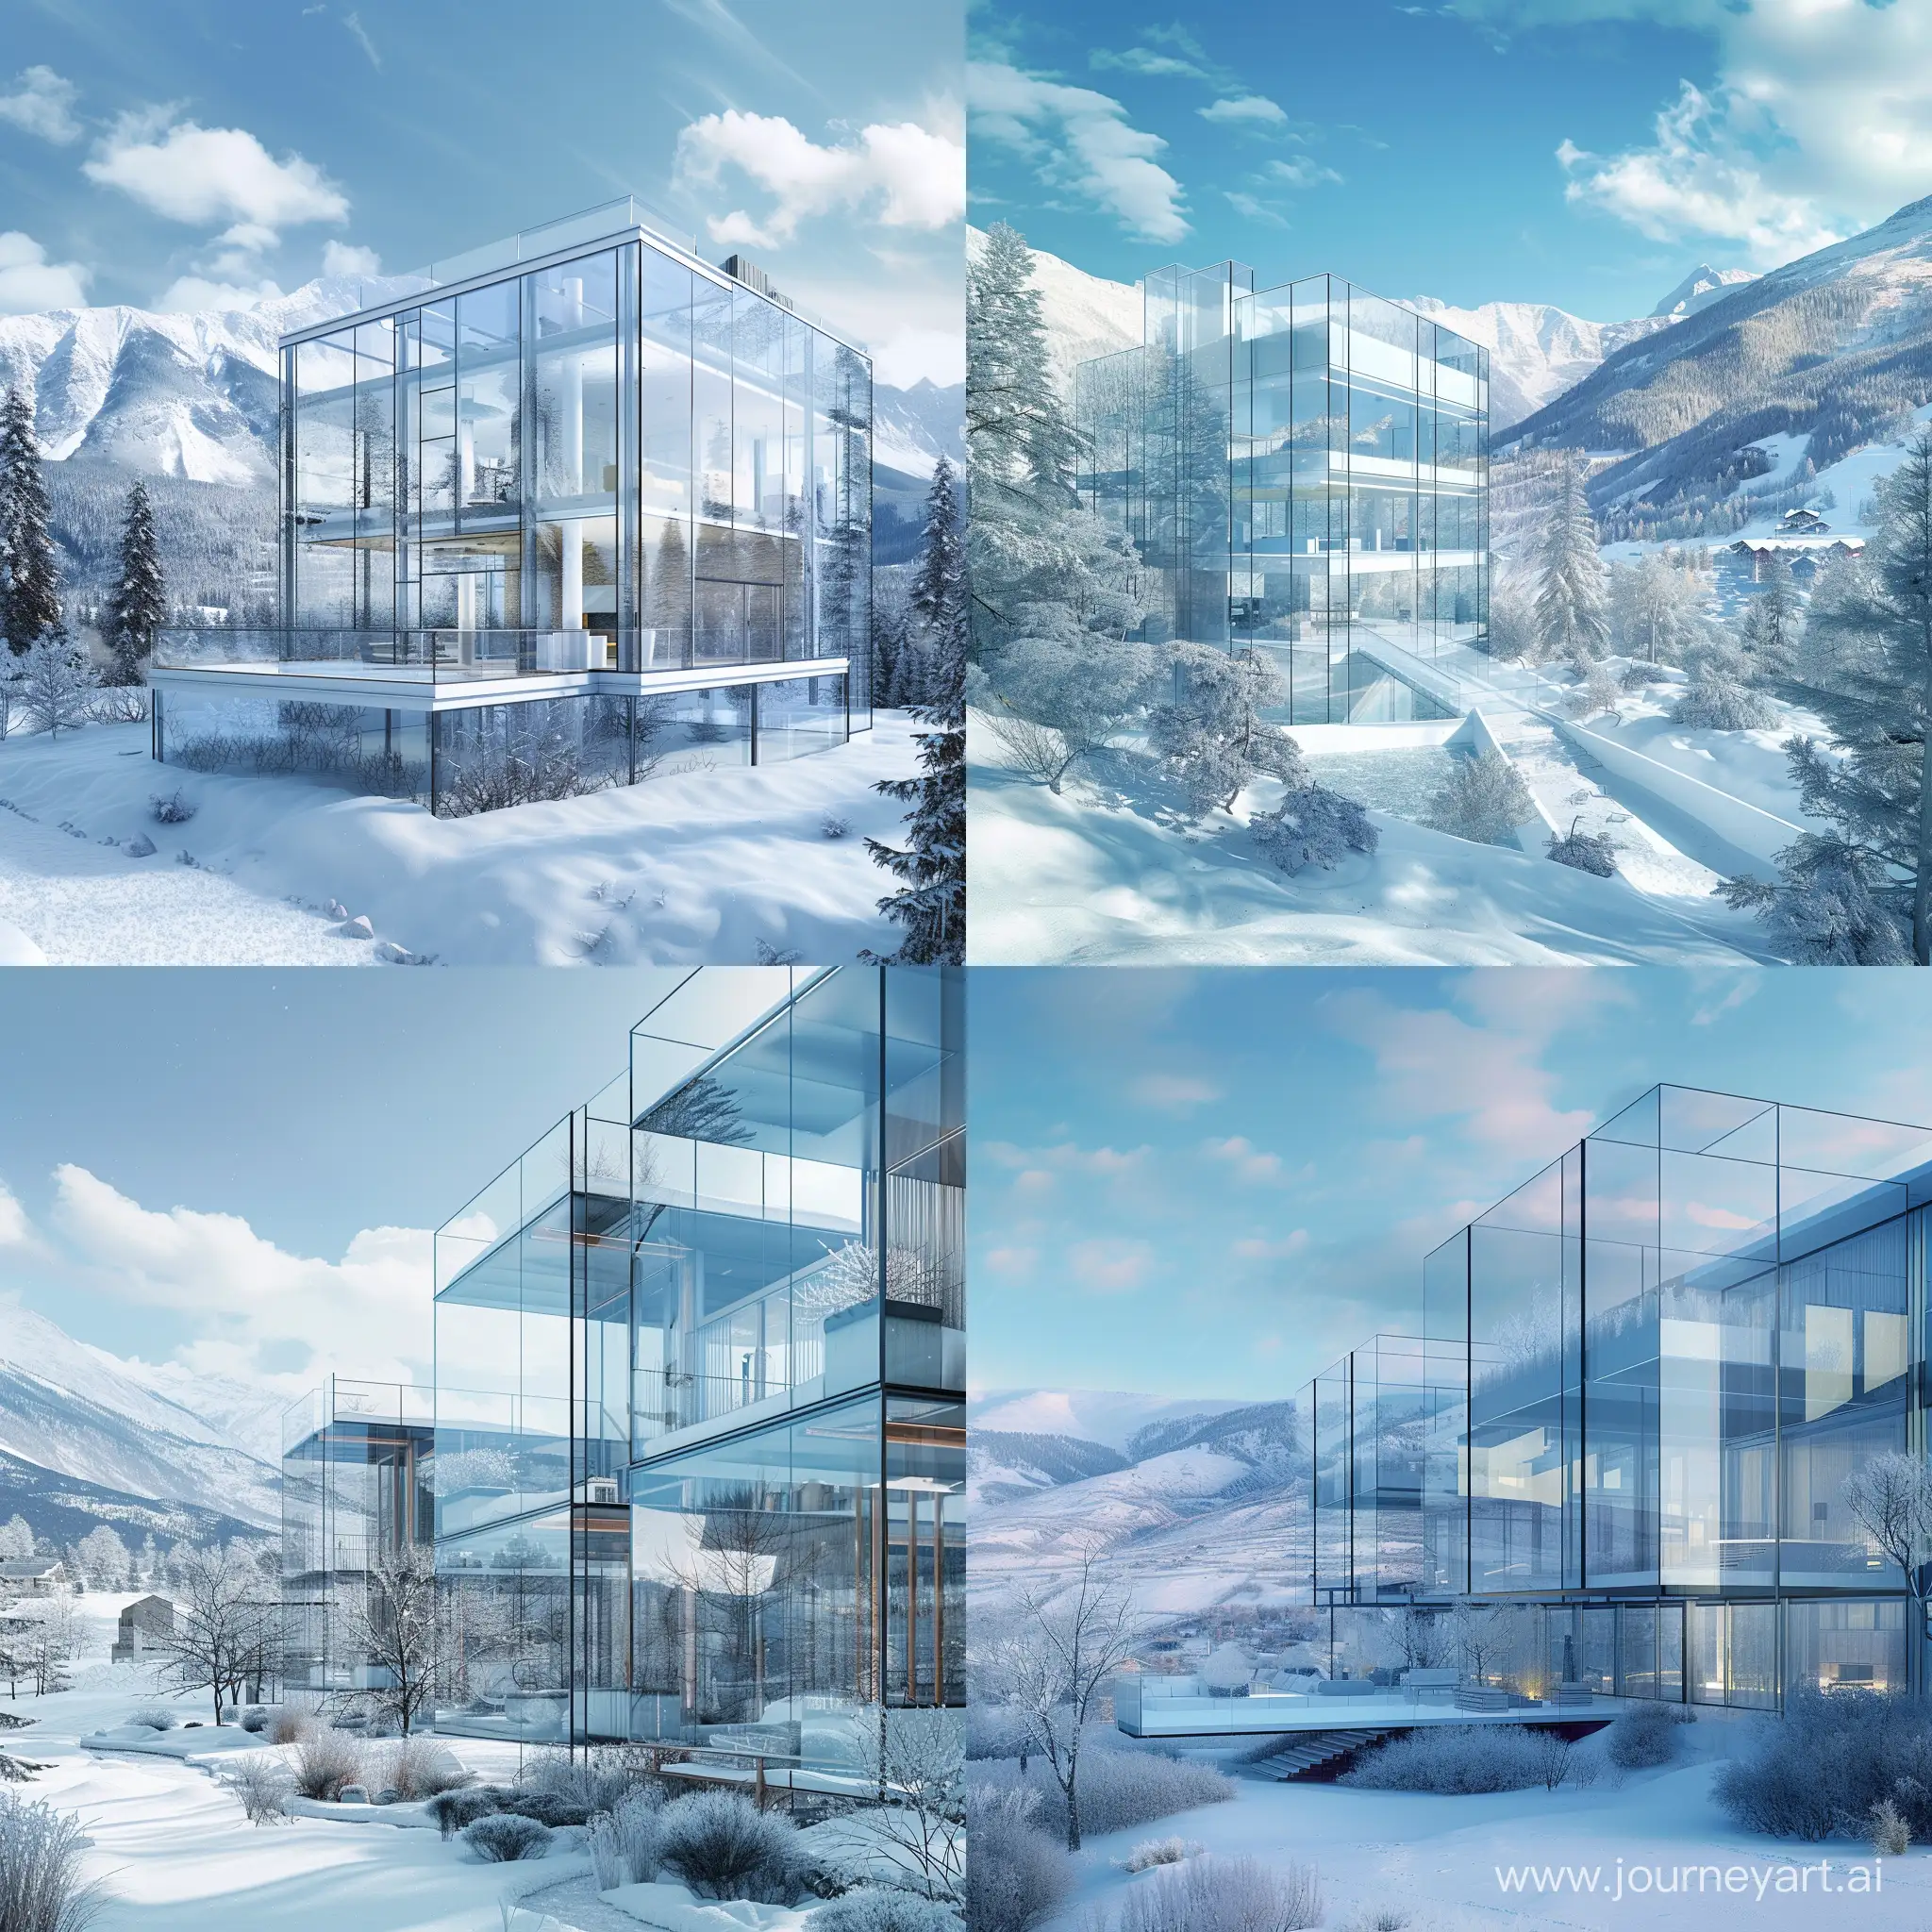 "Imagine a winter wonderland like no other – 'Crystal Clear Condos.' Envision sleek, glass-encased retreats rising majestically amidst the serene, snowy terrain. With our prompt, bring to life the elegance of modern architecture seamlessly blending with nature's beauty. Let your creativity soar as you craft vivid scenes of uninterrupted mountain vistas and luxurious living spaces, all captured in the pristine clarity of glass."
